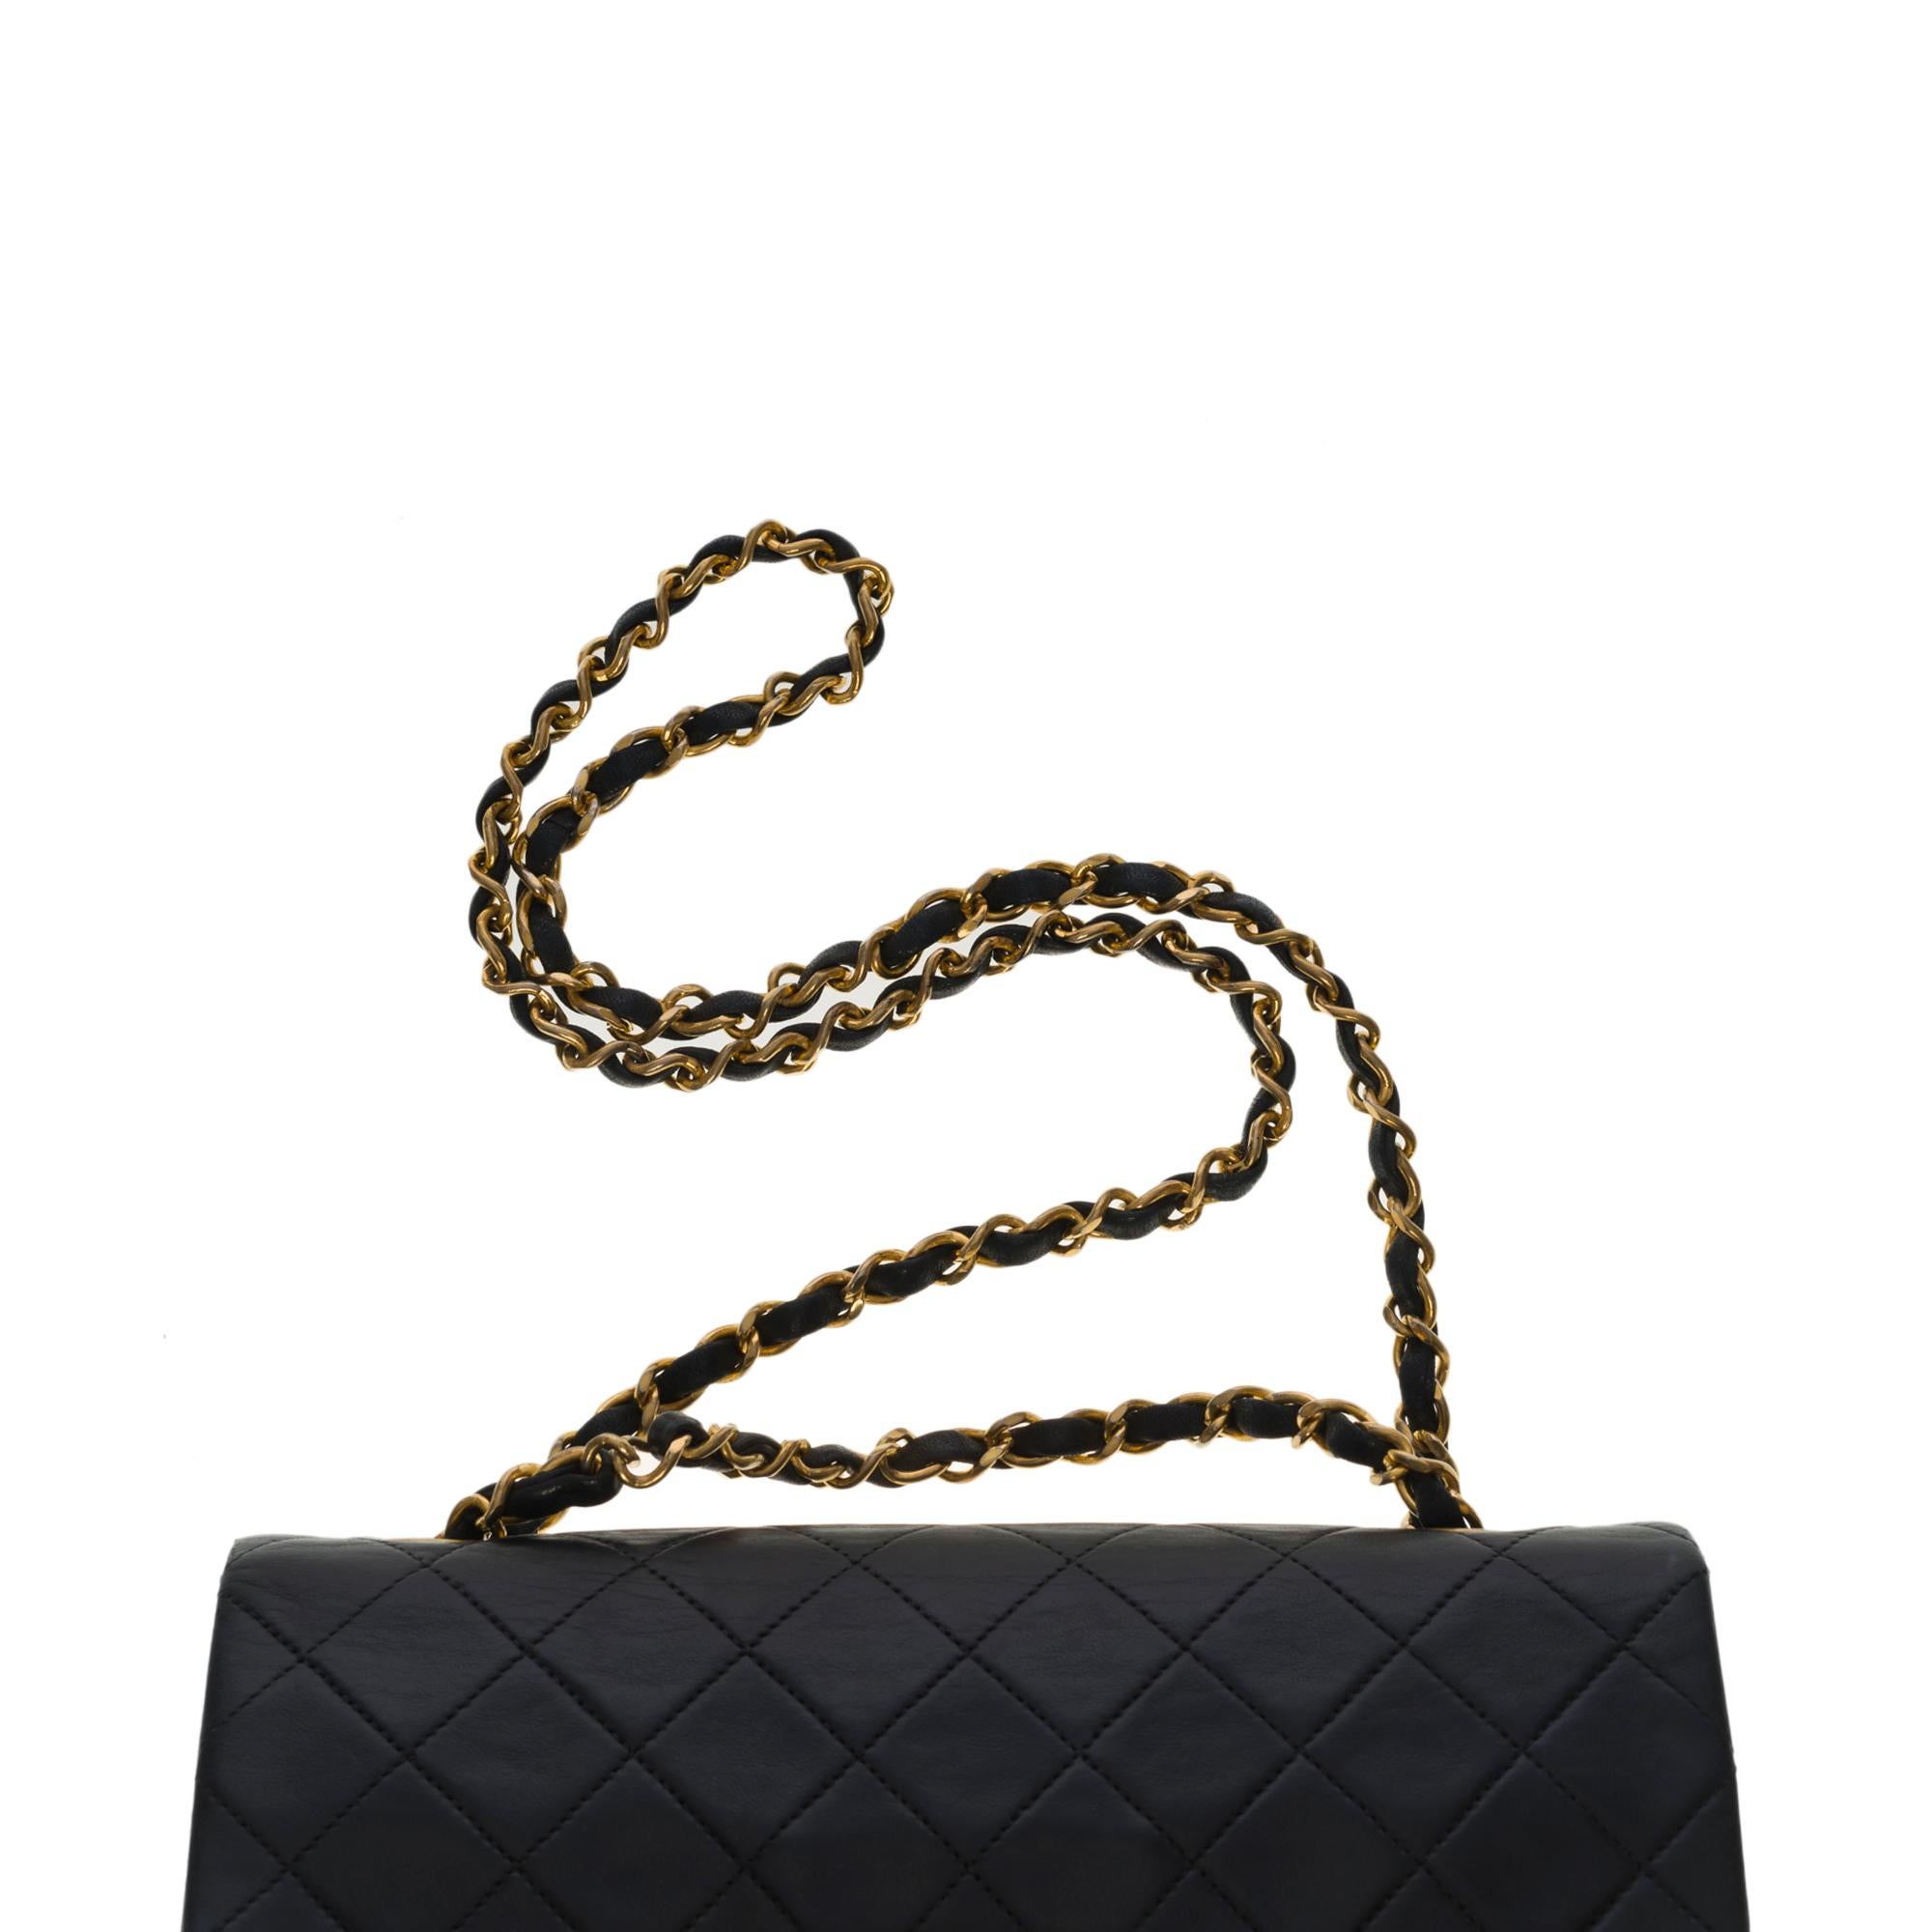 Chanel Timeless 23 cm double flap shoulder bag in black quilted lambskin, GHW 1